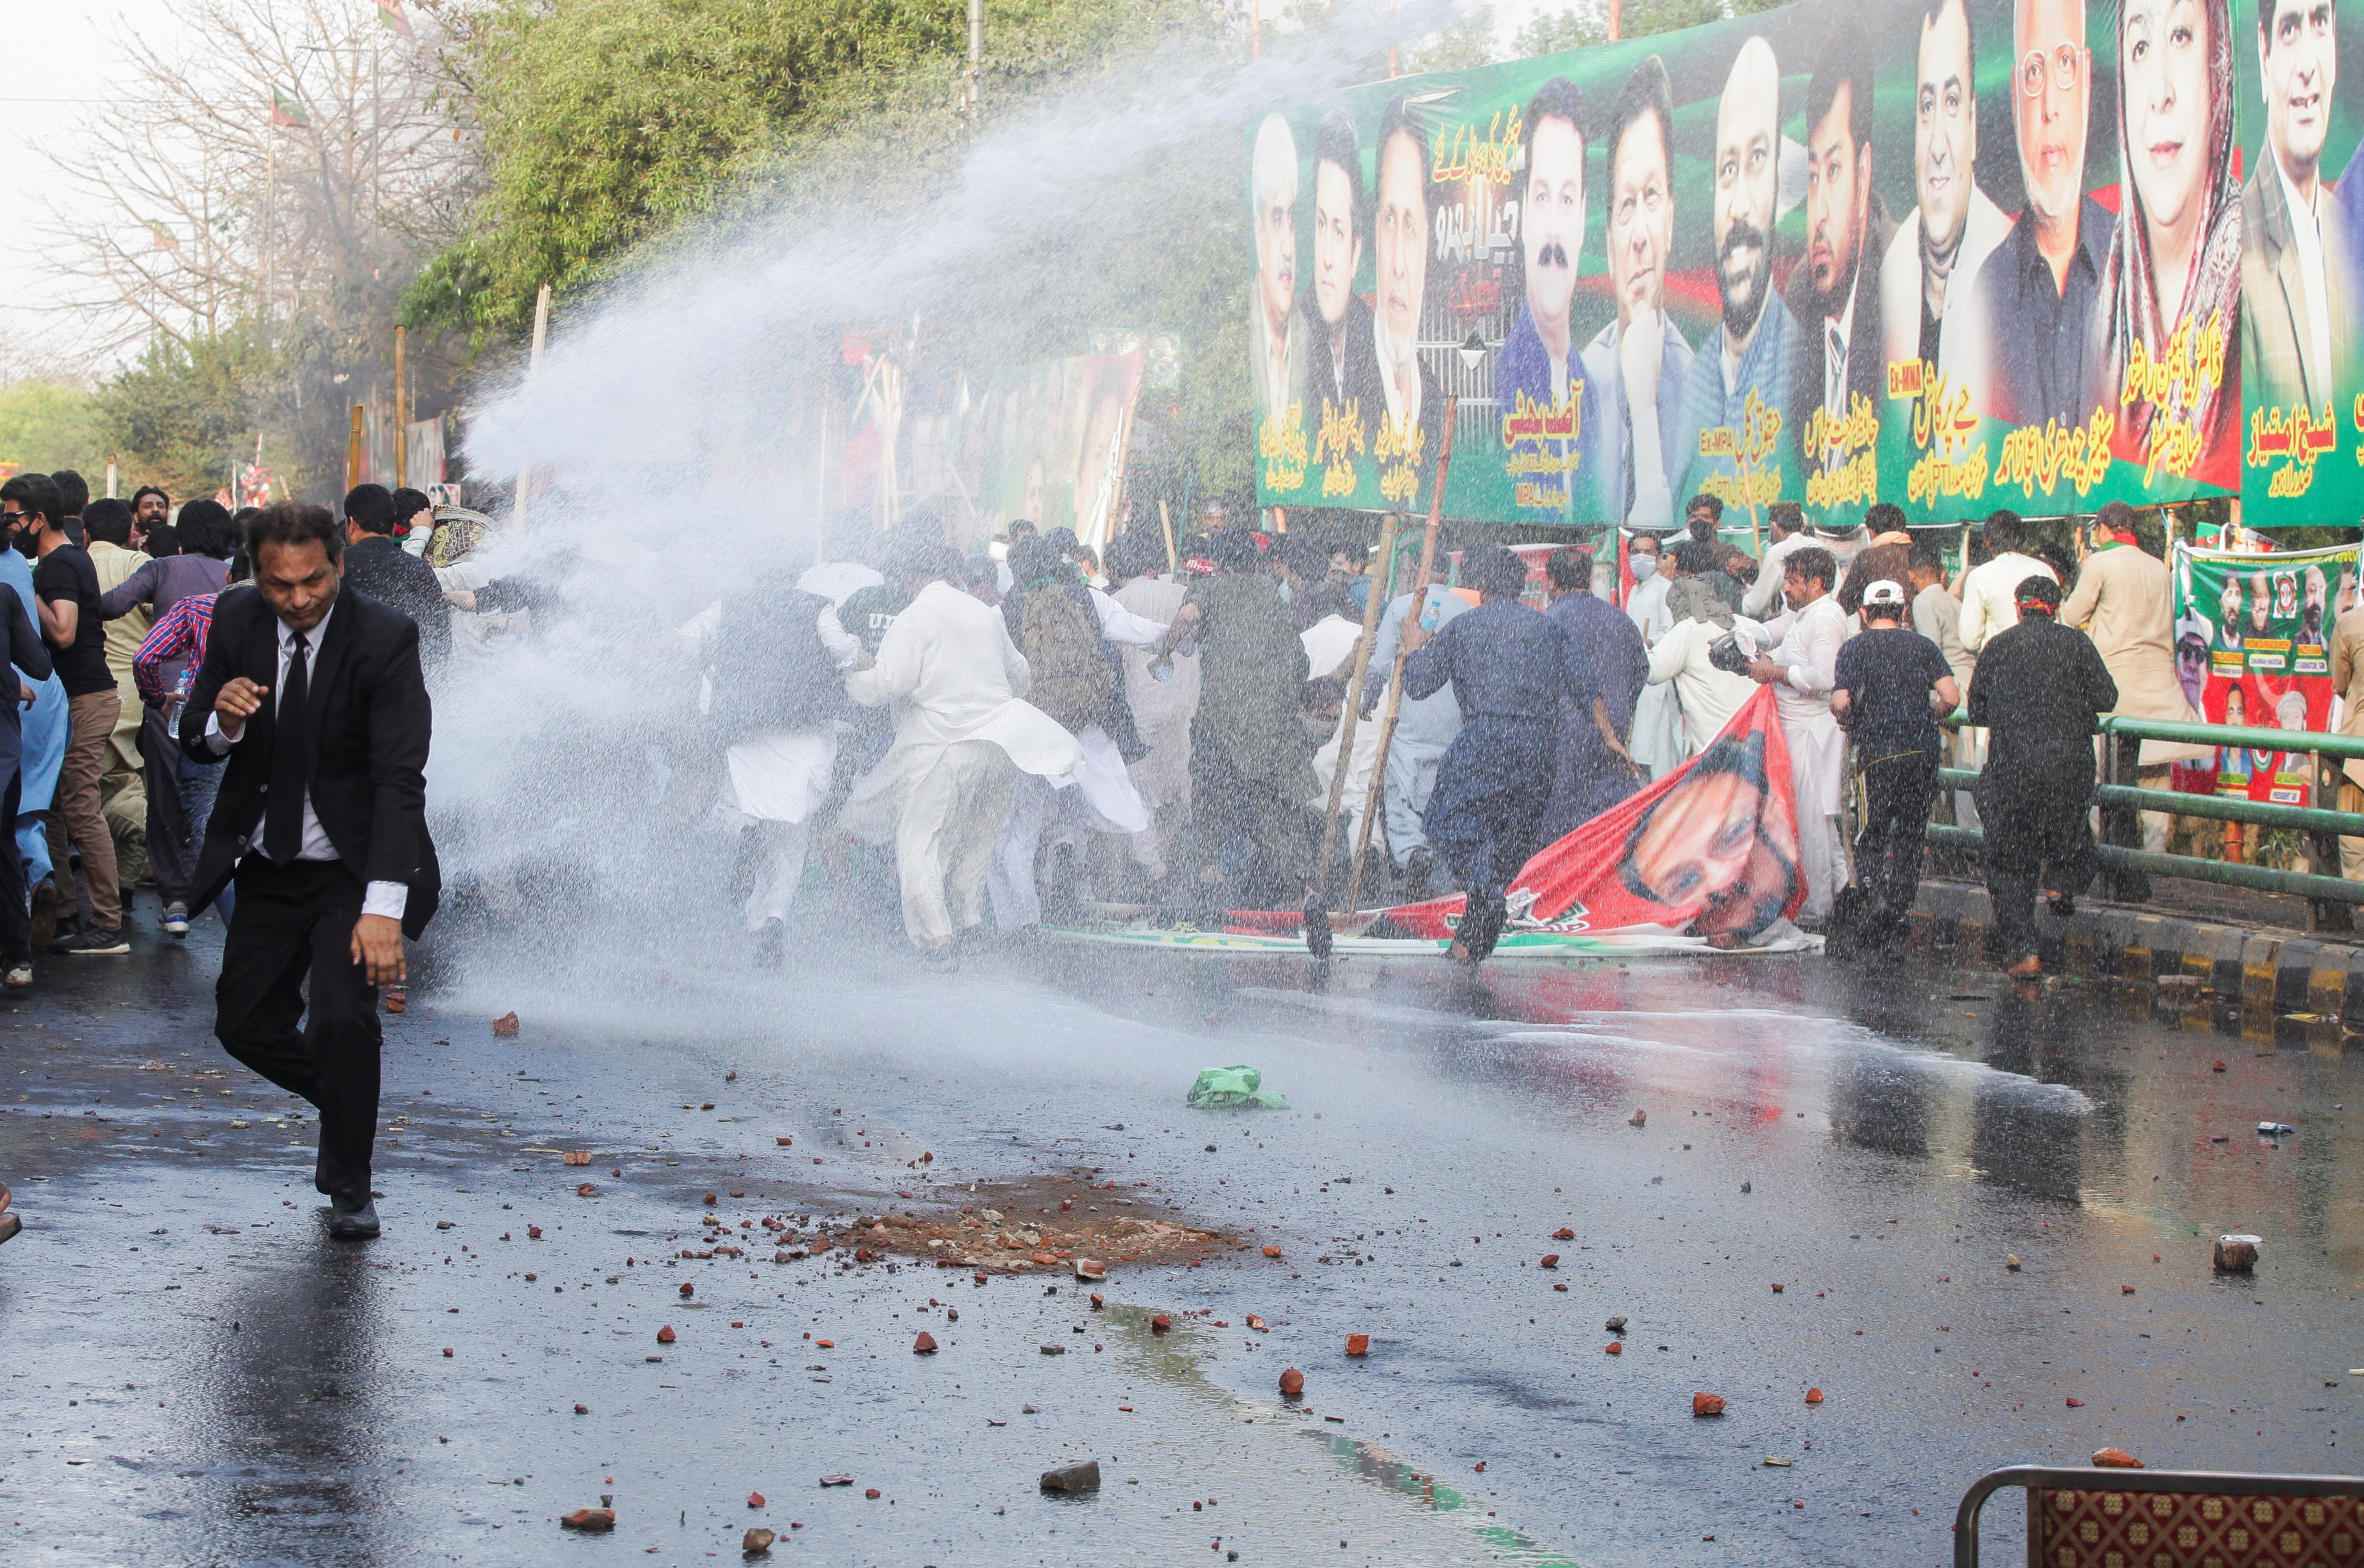 Supporters of former Pakistani PM Khan clash with police ahead of his possible arrest, in Lahore